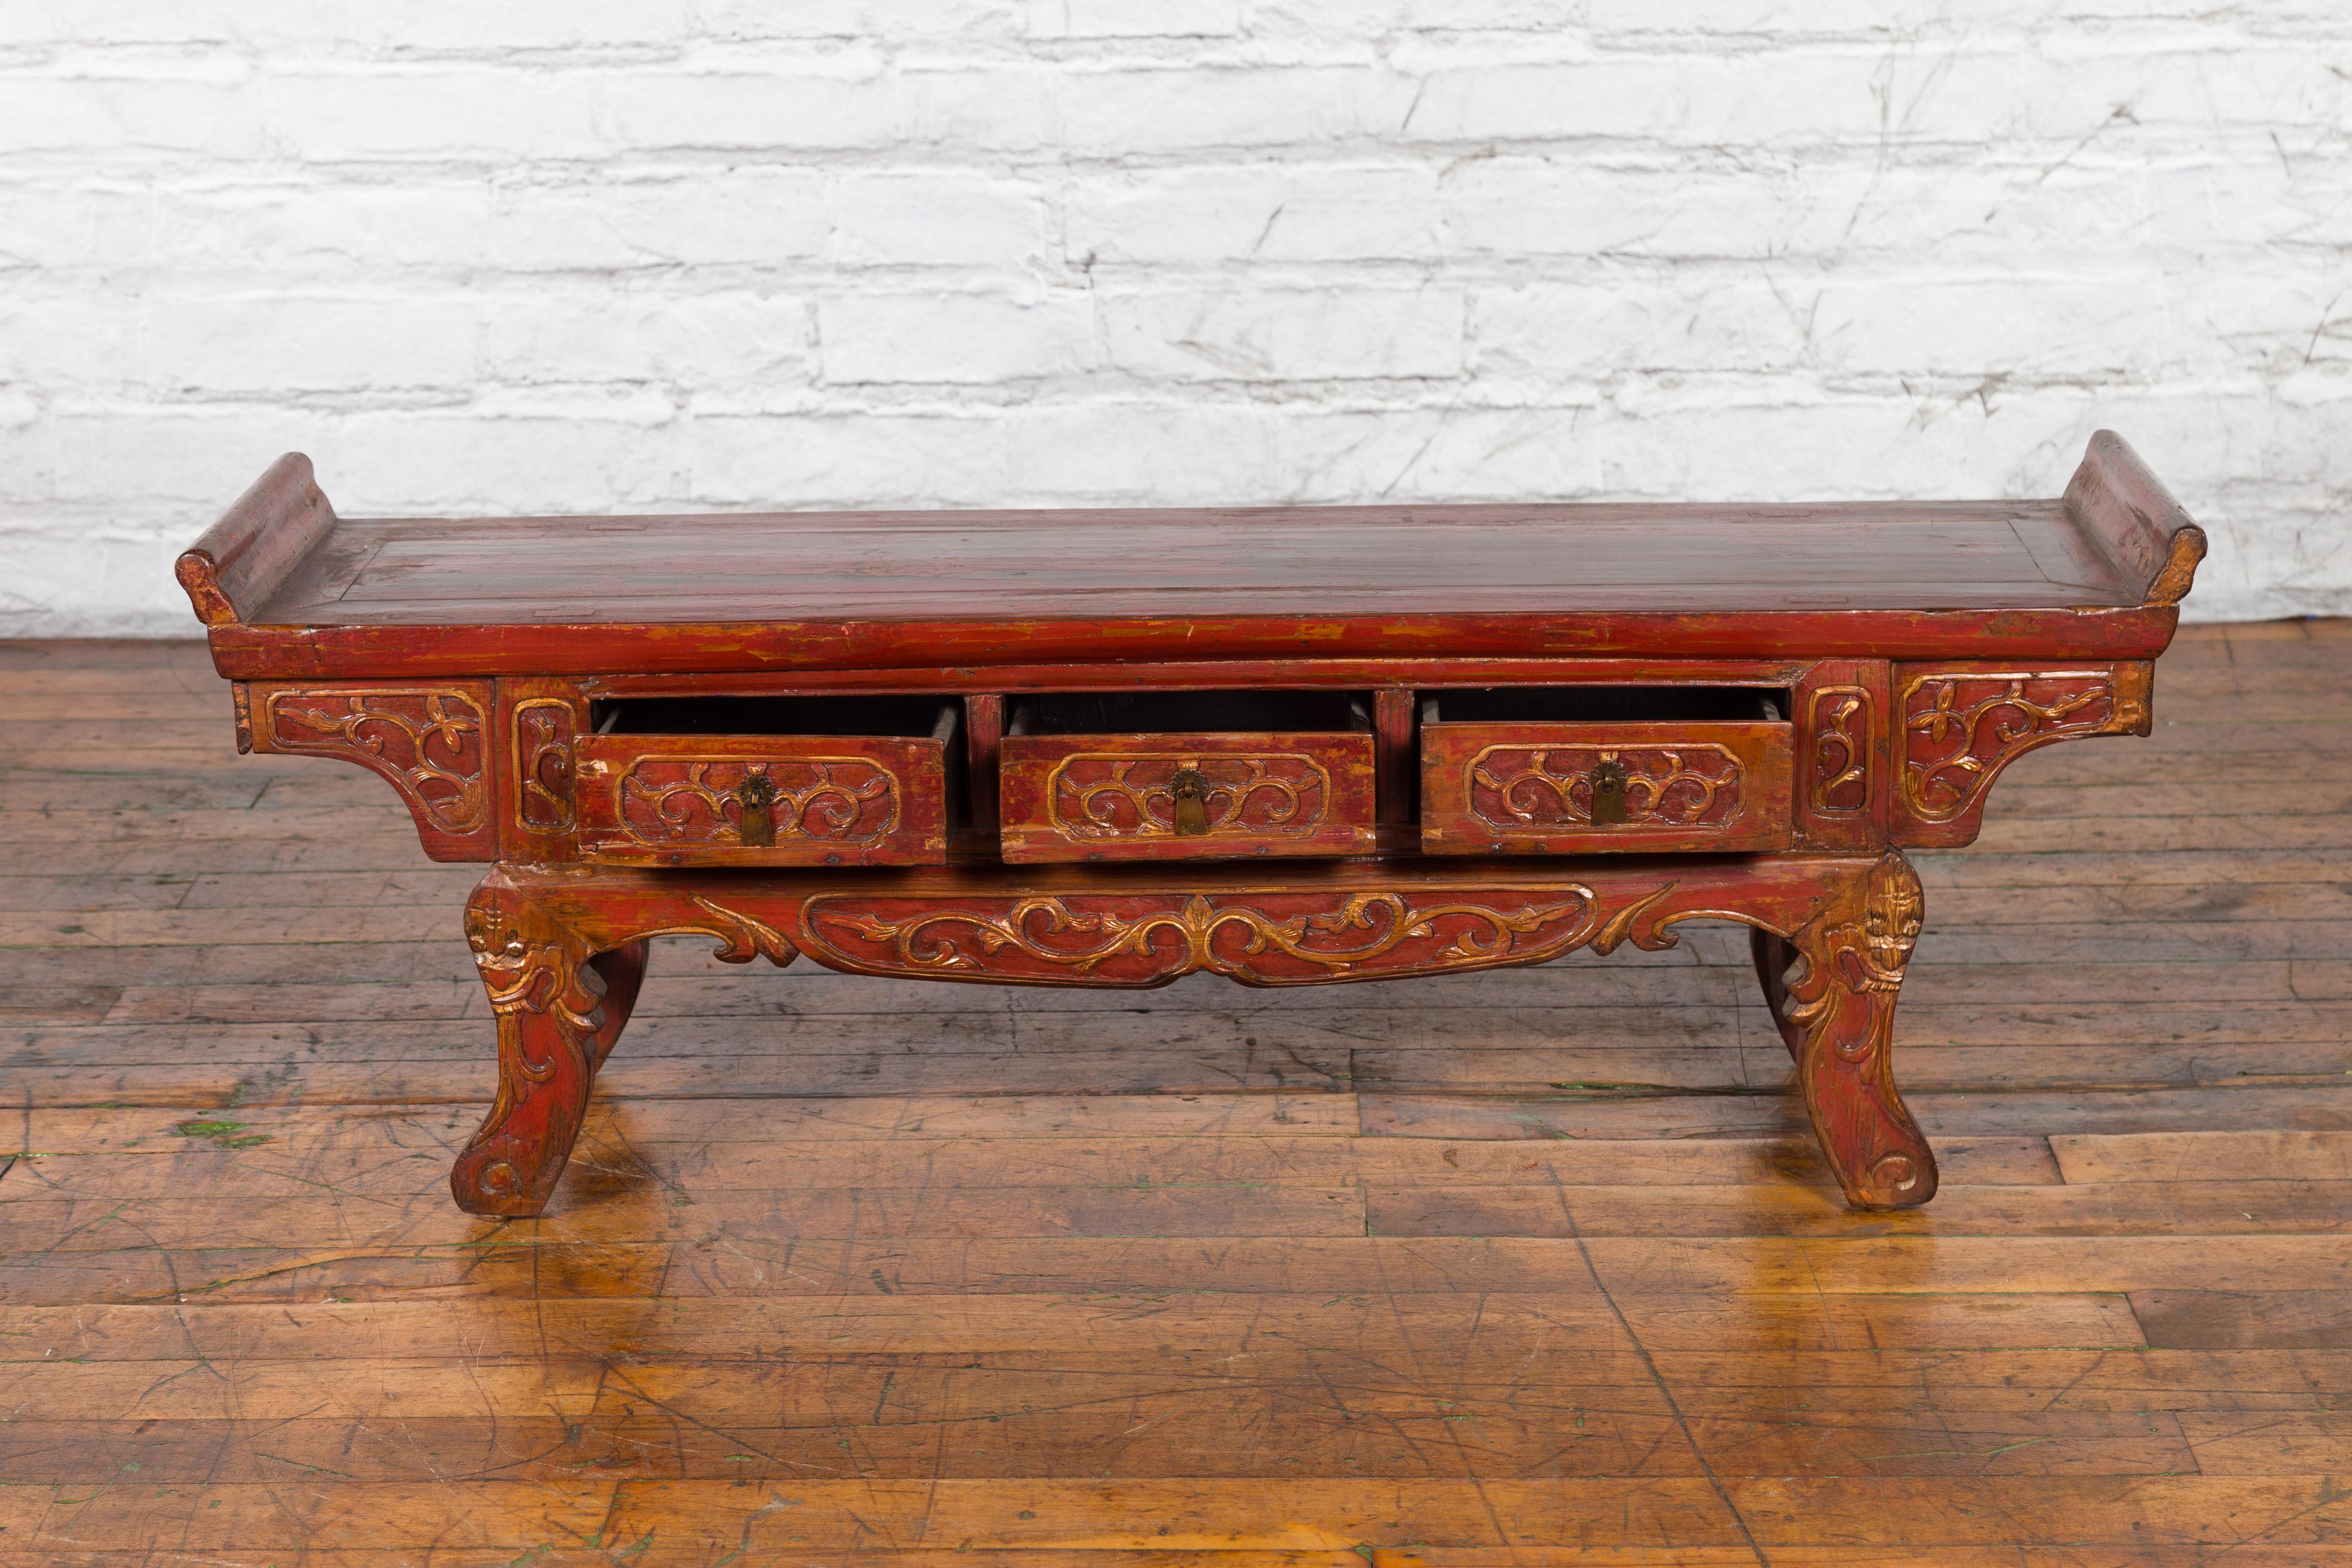 Chinese Qing Dynasty 19th Century Red Lacquer Low Altar Table with Carved Motifs For Sale 3